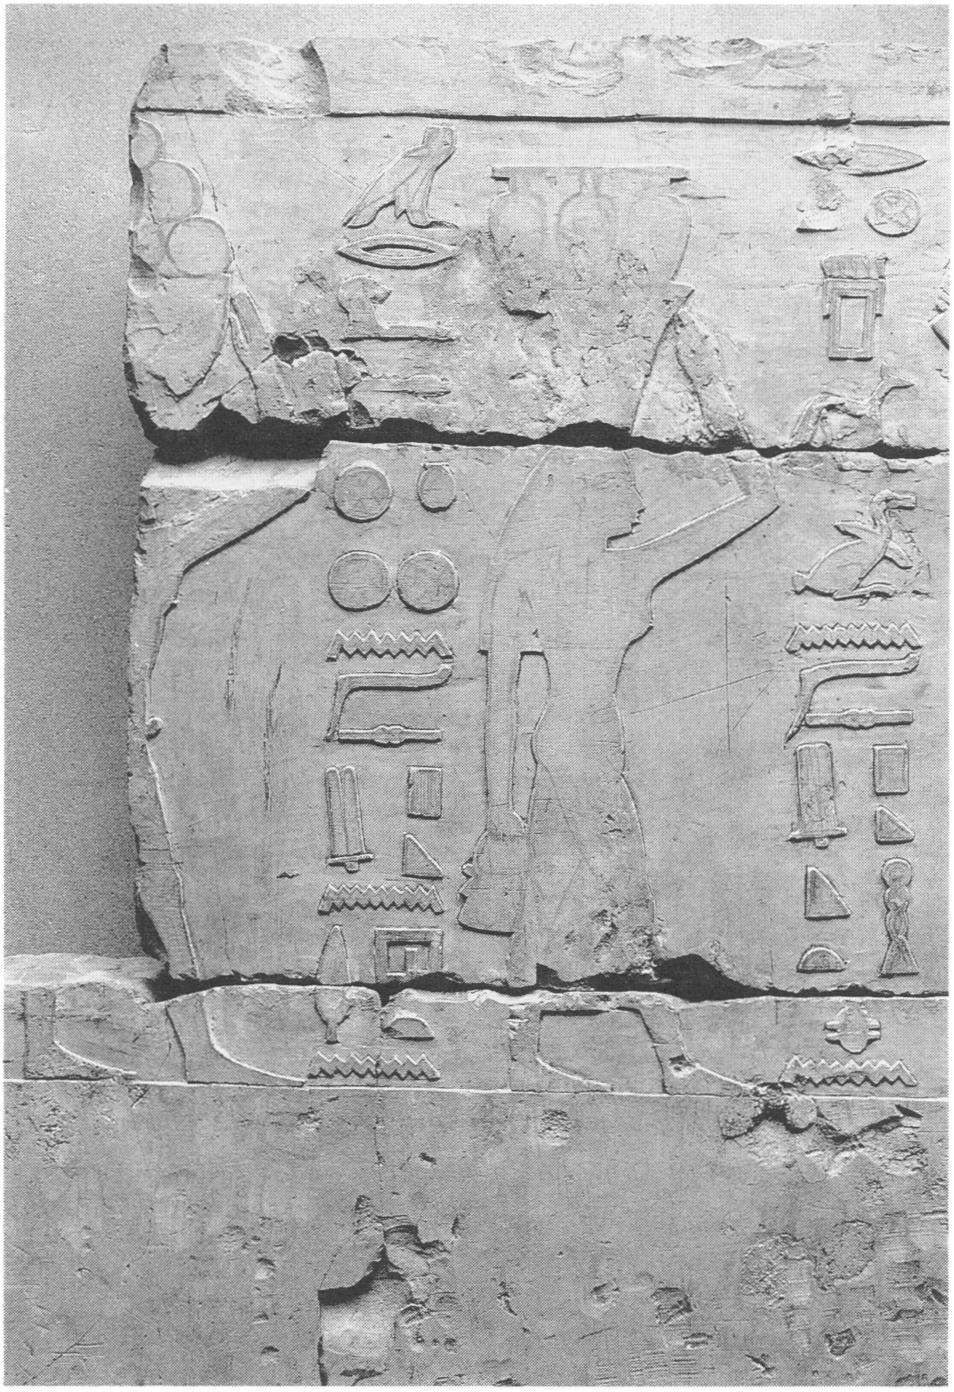 Oriental Institute Museum, University of Chicago, OIM 18236; 3. Brooklyn Museum of Art, New York 52.131.1-32 and 68.1; 4. The Art Museum, Princeton University, 50-127 (EP 5, 7); 5.